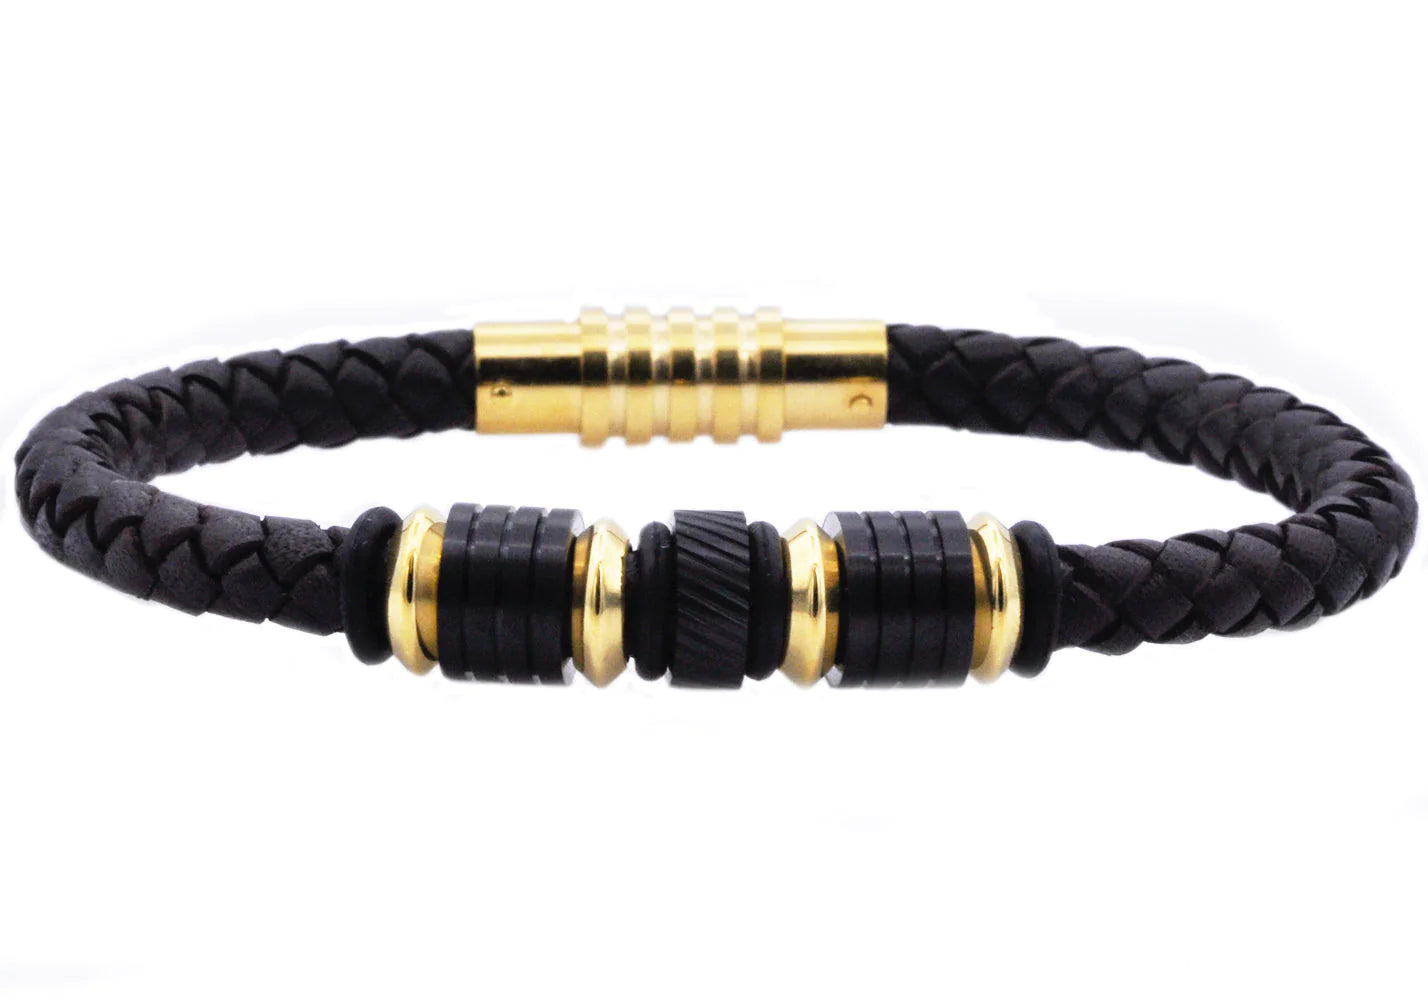 Men's Blackjack bracelet 18k gold plated and leather. 0/3 inches in width, 8.5 inches in length. 